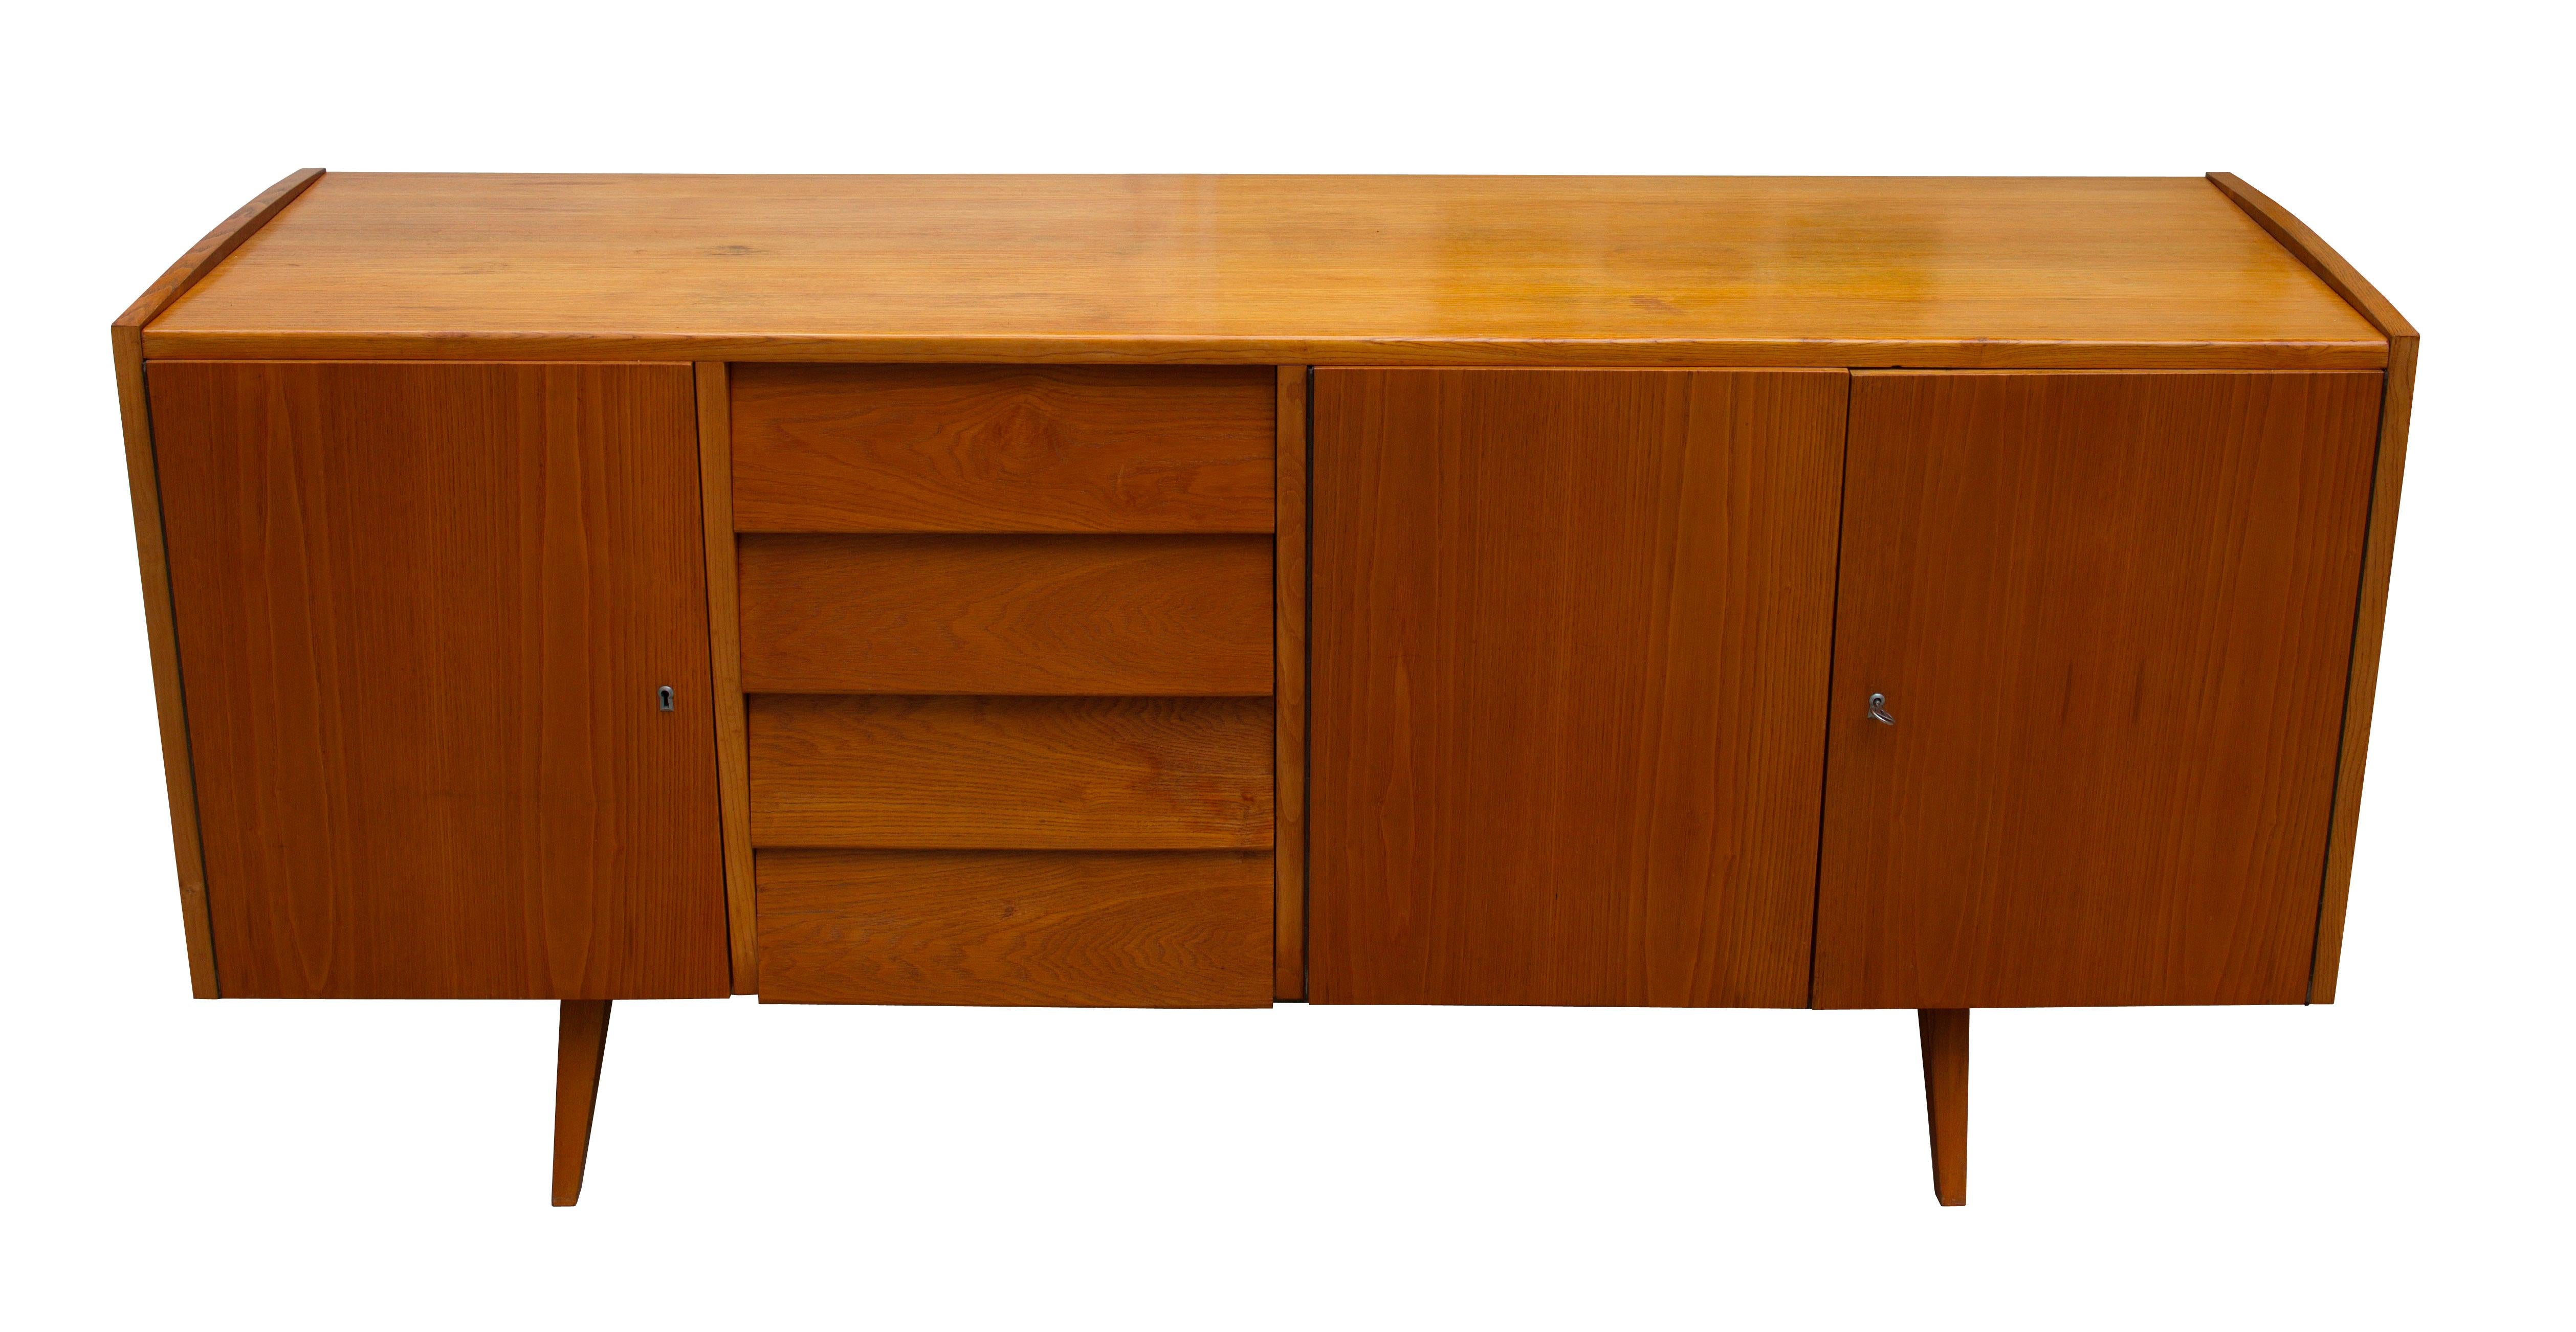 This midcentury sideboard was designed by the legendary Czech furniture designer Frantisek Jirak, and was manufactured in 1960s Czechoslovakia.
This piece is made of Ash and the charm of this sideboard lies in the elegant proportions and subtle